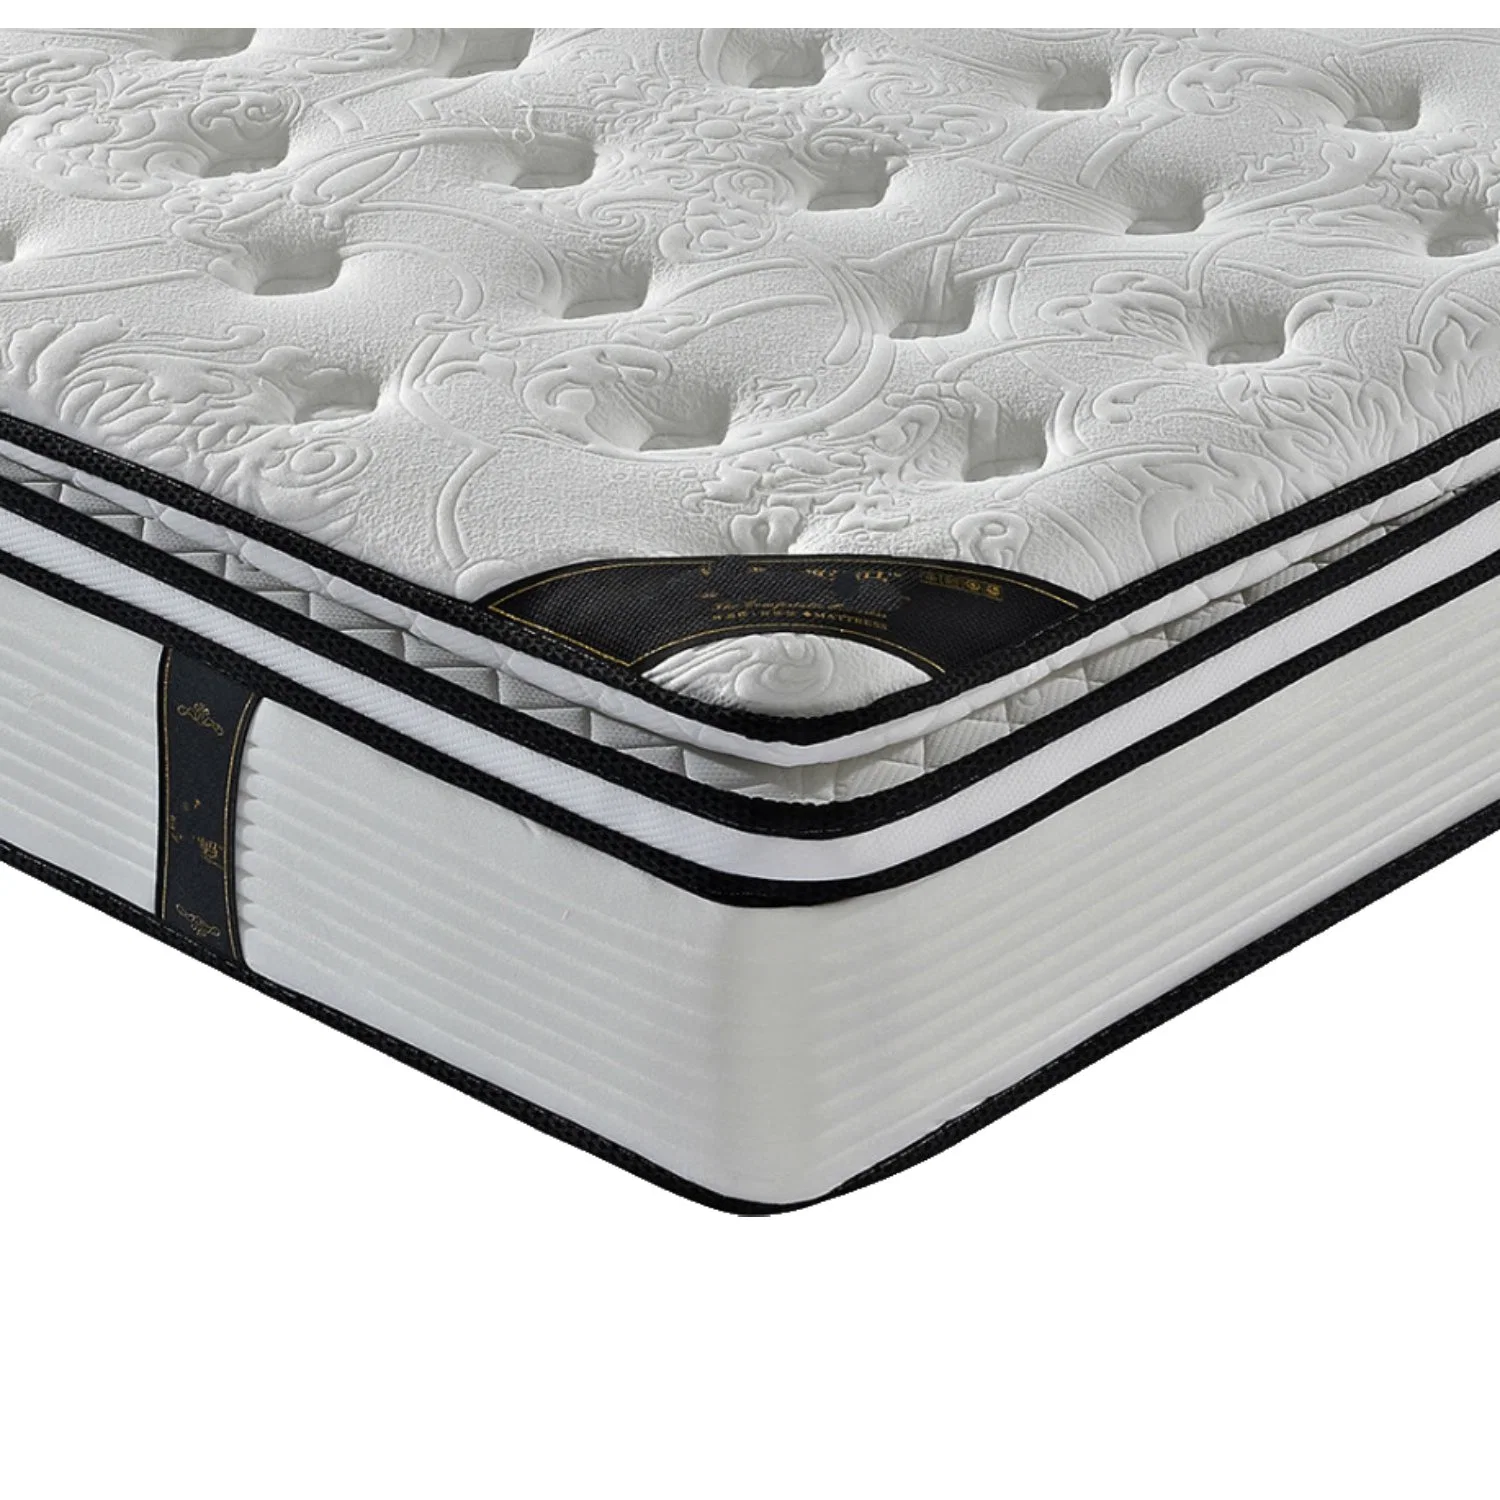 Luxury Latex Cool Gel Memory Foam Mattress 10 Inch and 12 Inch Queen Size and King Size